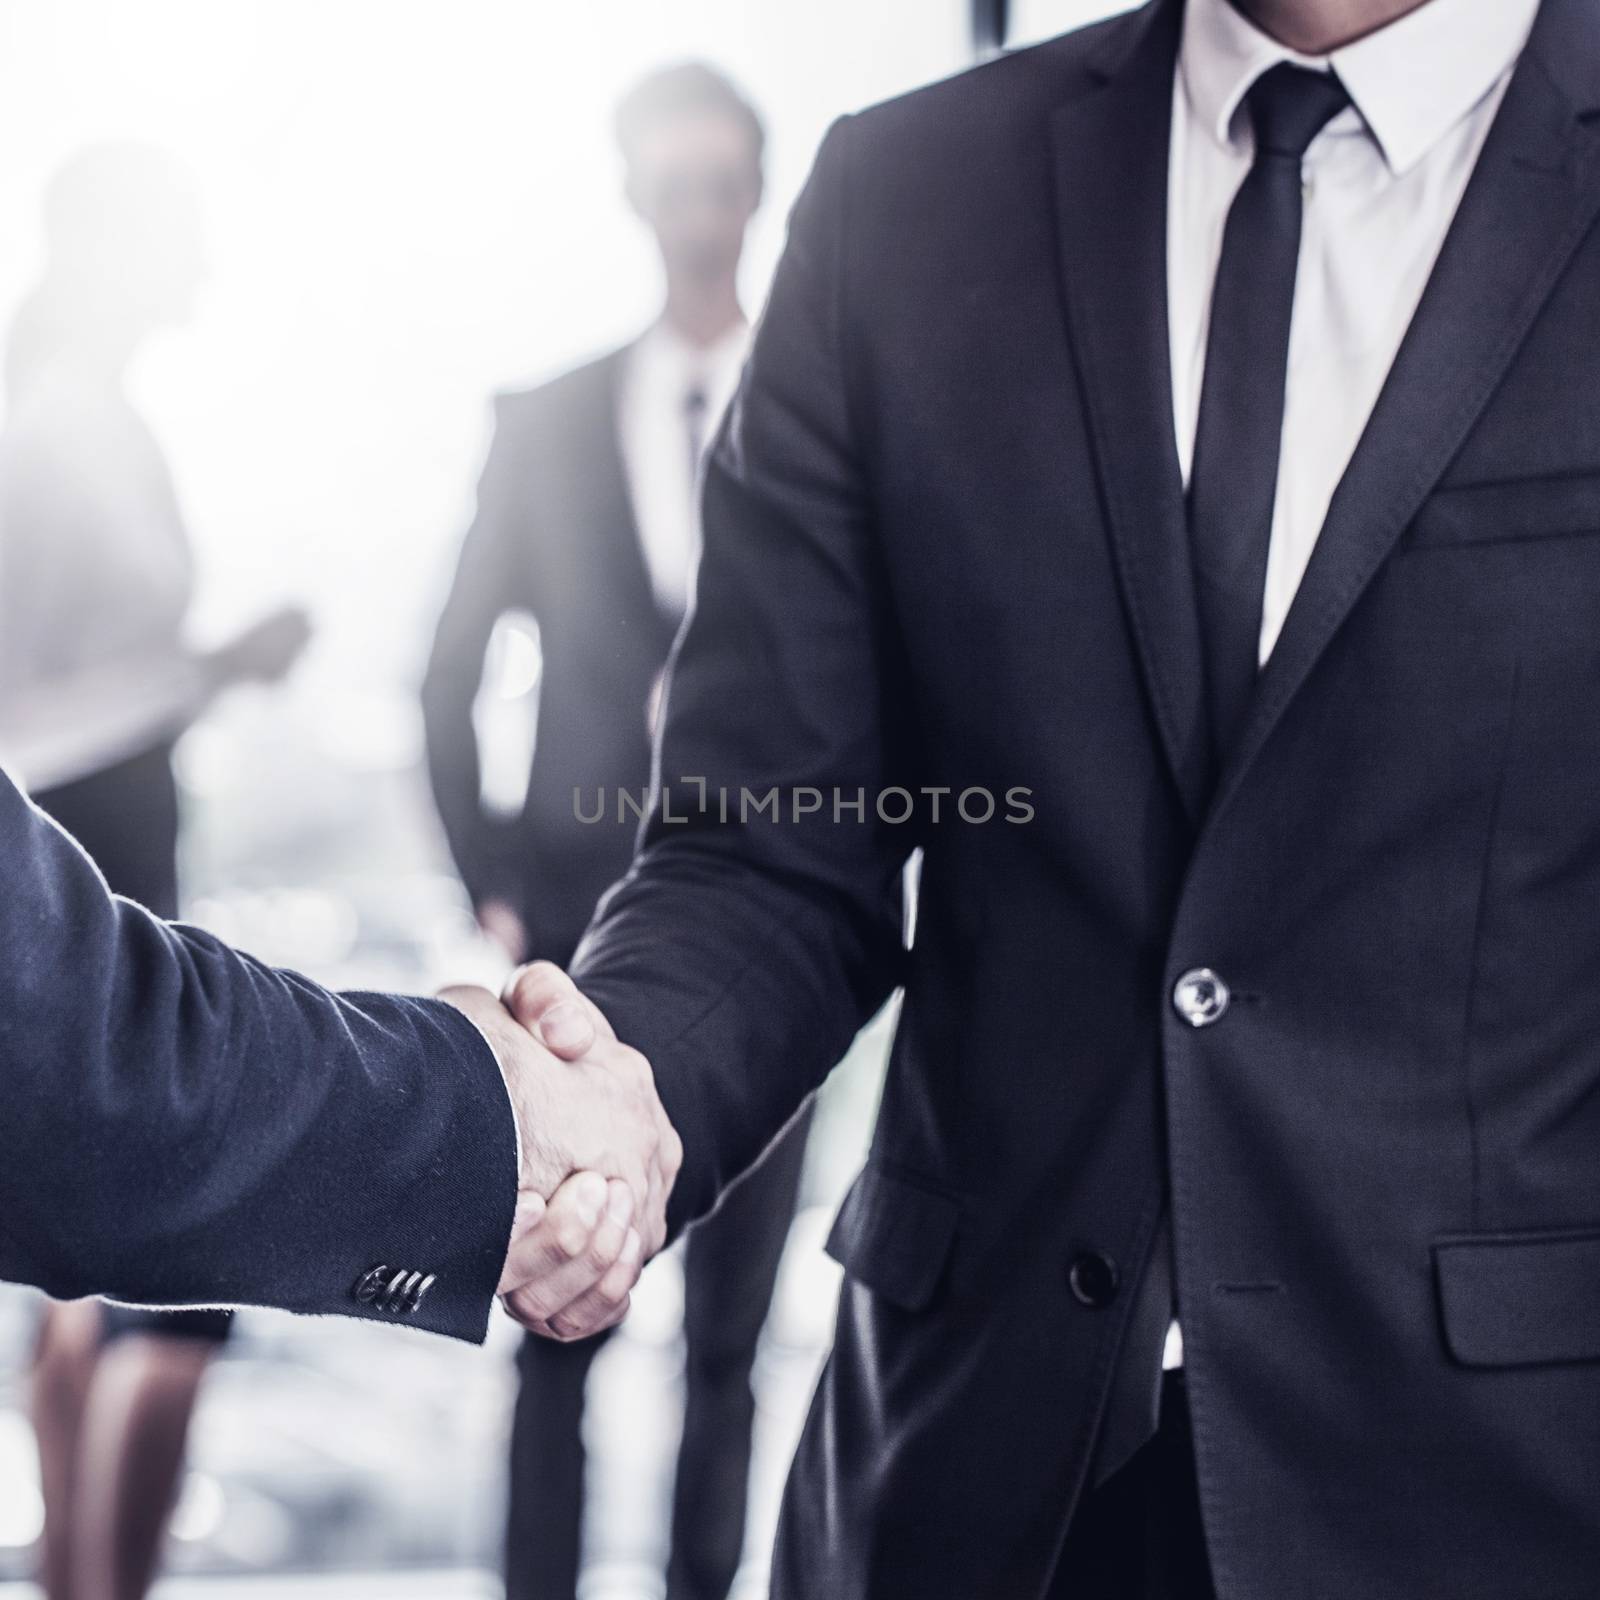 Handshake in front of business people team in office